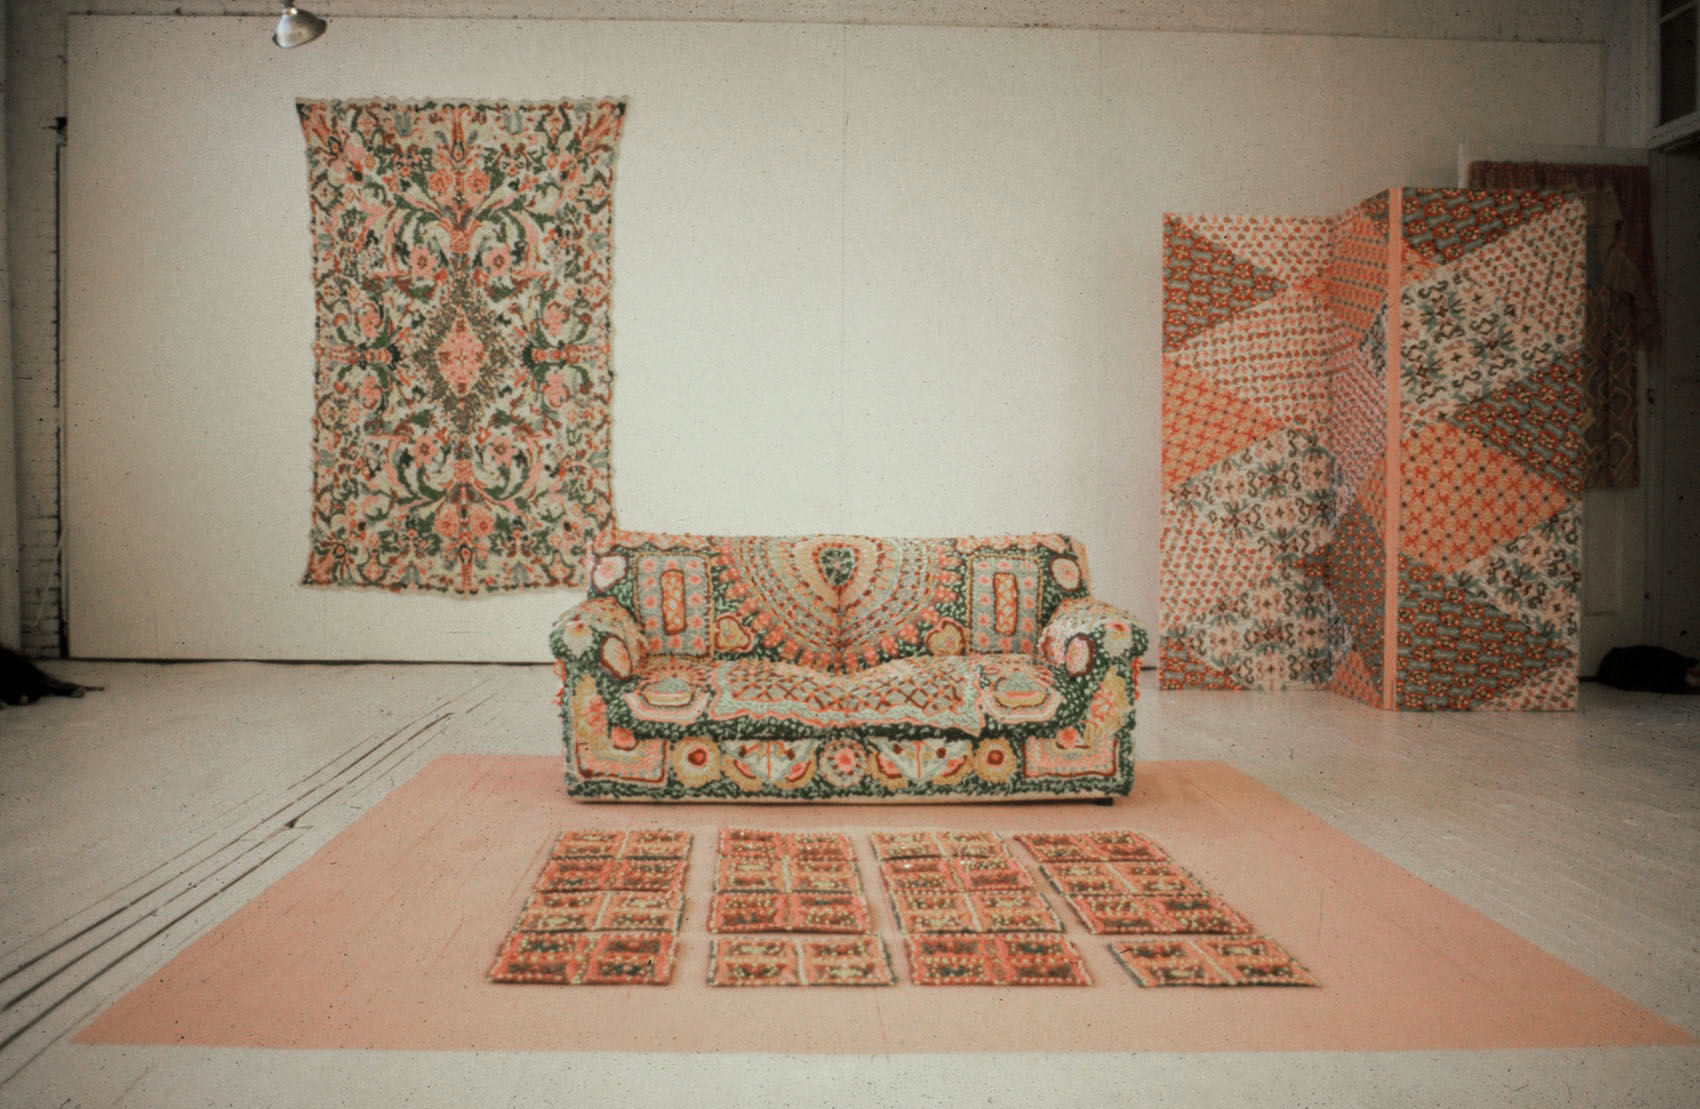 Front-facing view of an installation featuring a colorful couch patterned with doily-like motifs, a rug with a quilt-like design, a colorful room divider, and a colorful rectangular wall hanging.